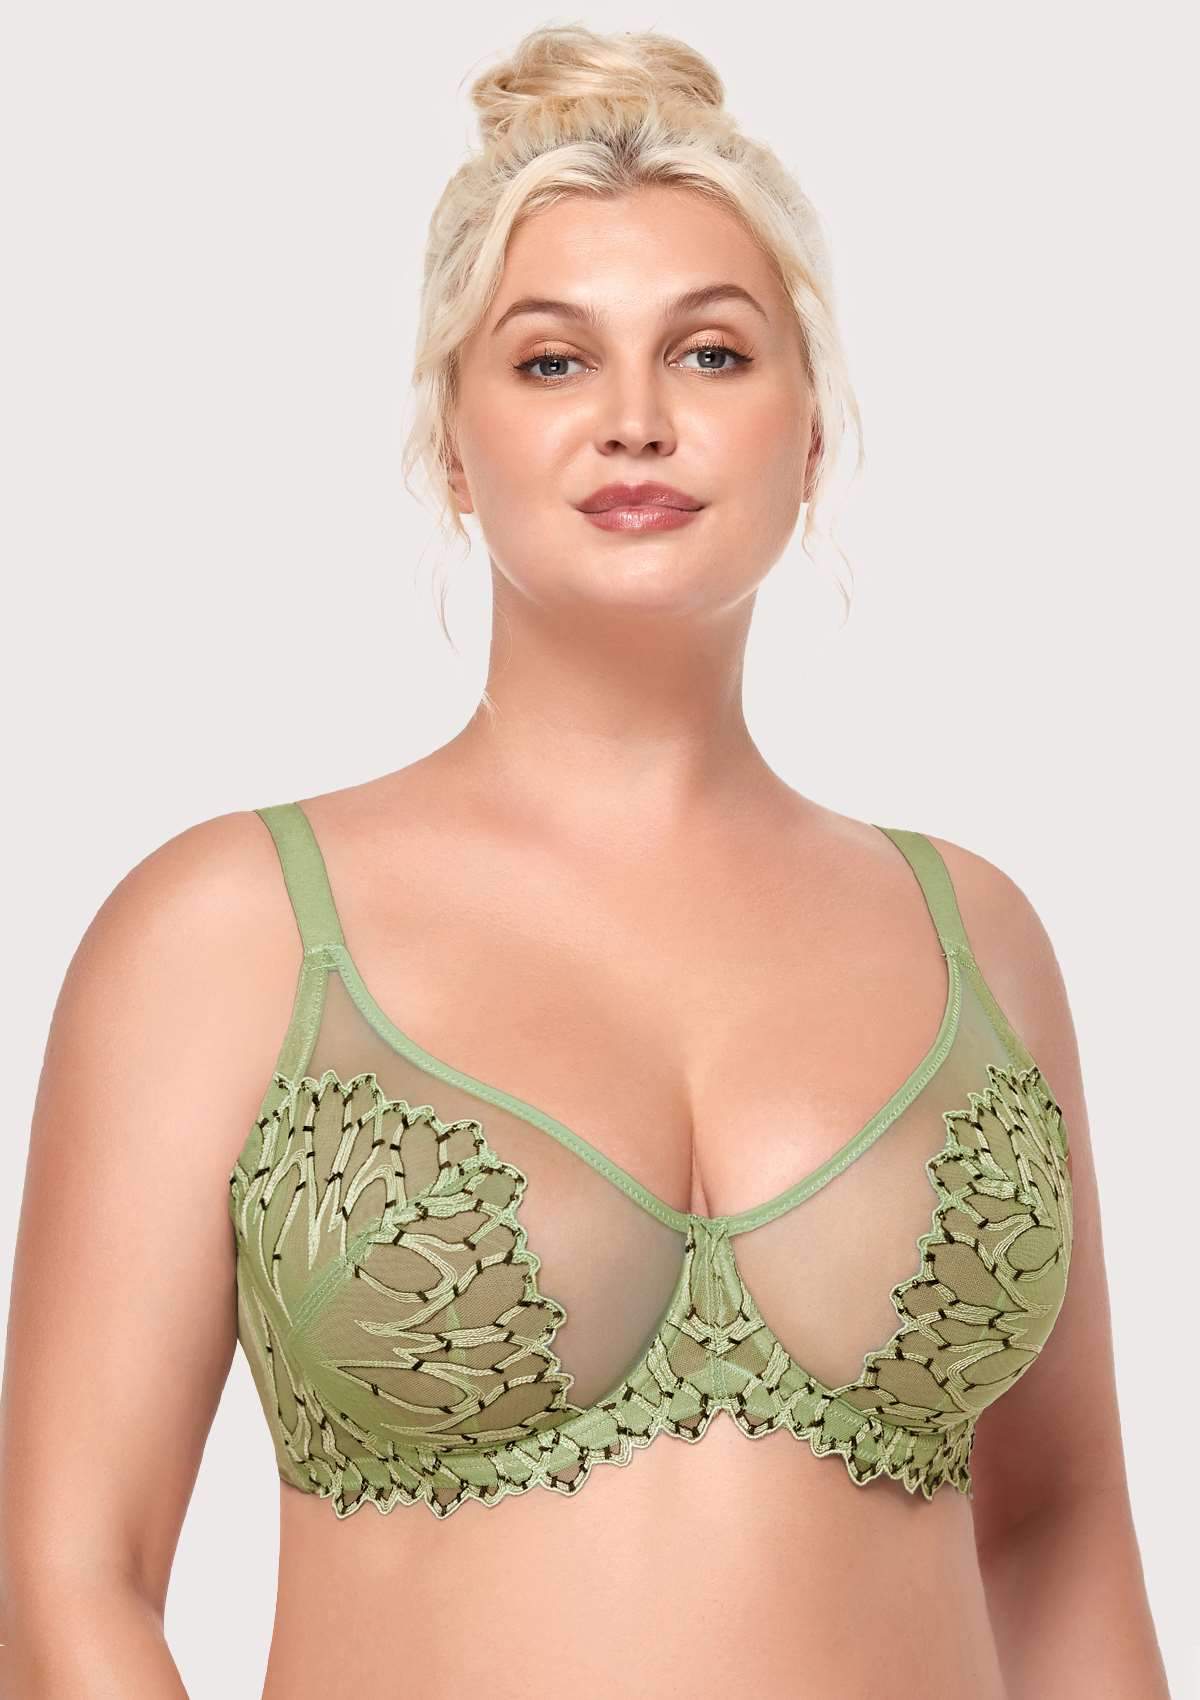 HSIA Chrysanthemum Floral Embroidered Bra: Lace Sheer Unpadded Bra - Green / 34 / C